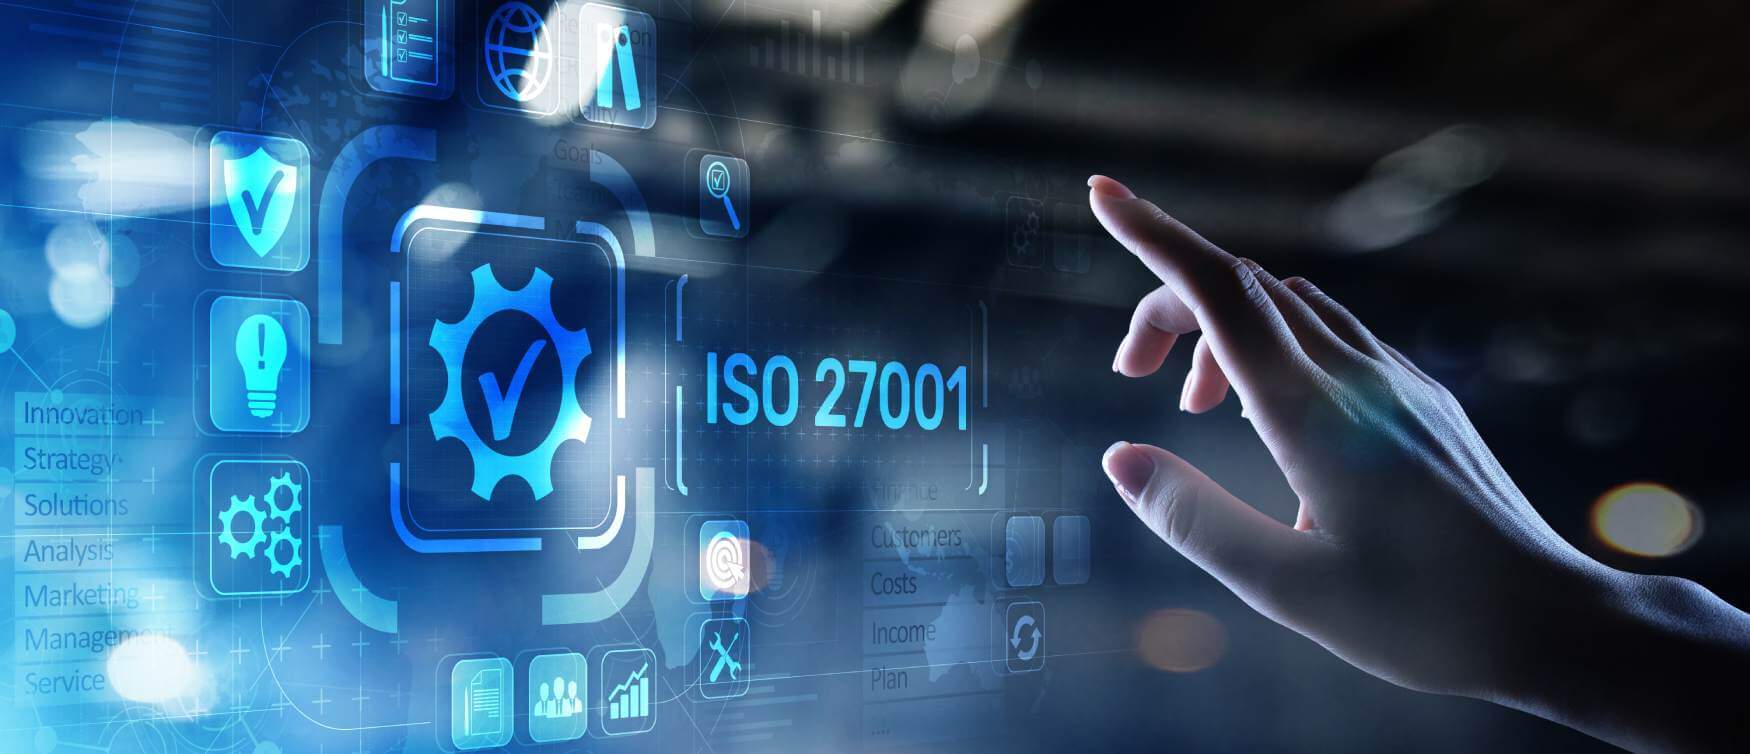 Hand pointing to ISO 27001 text